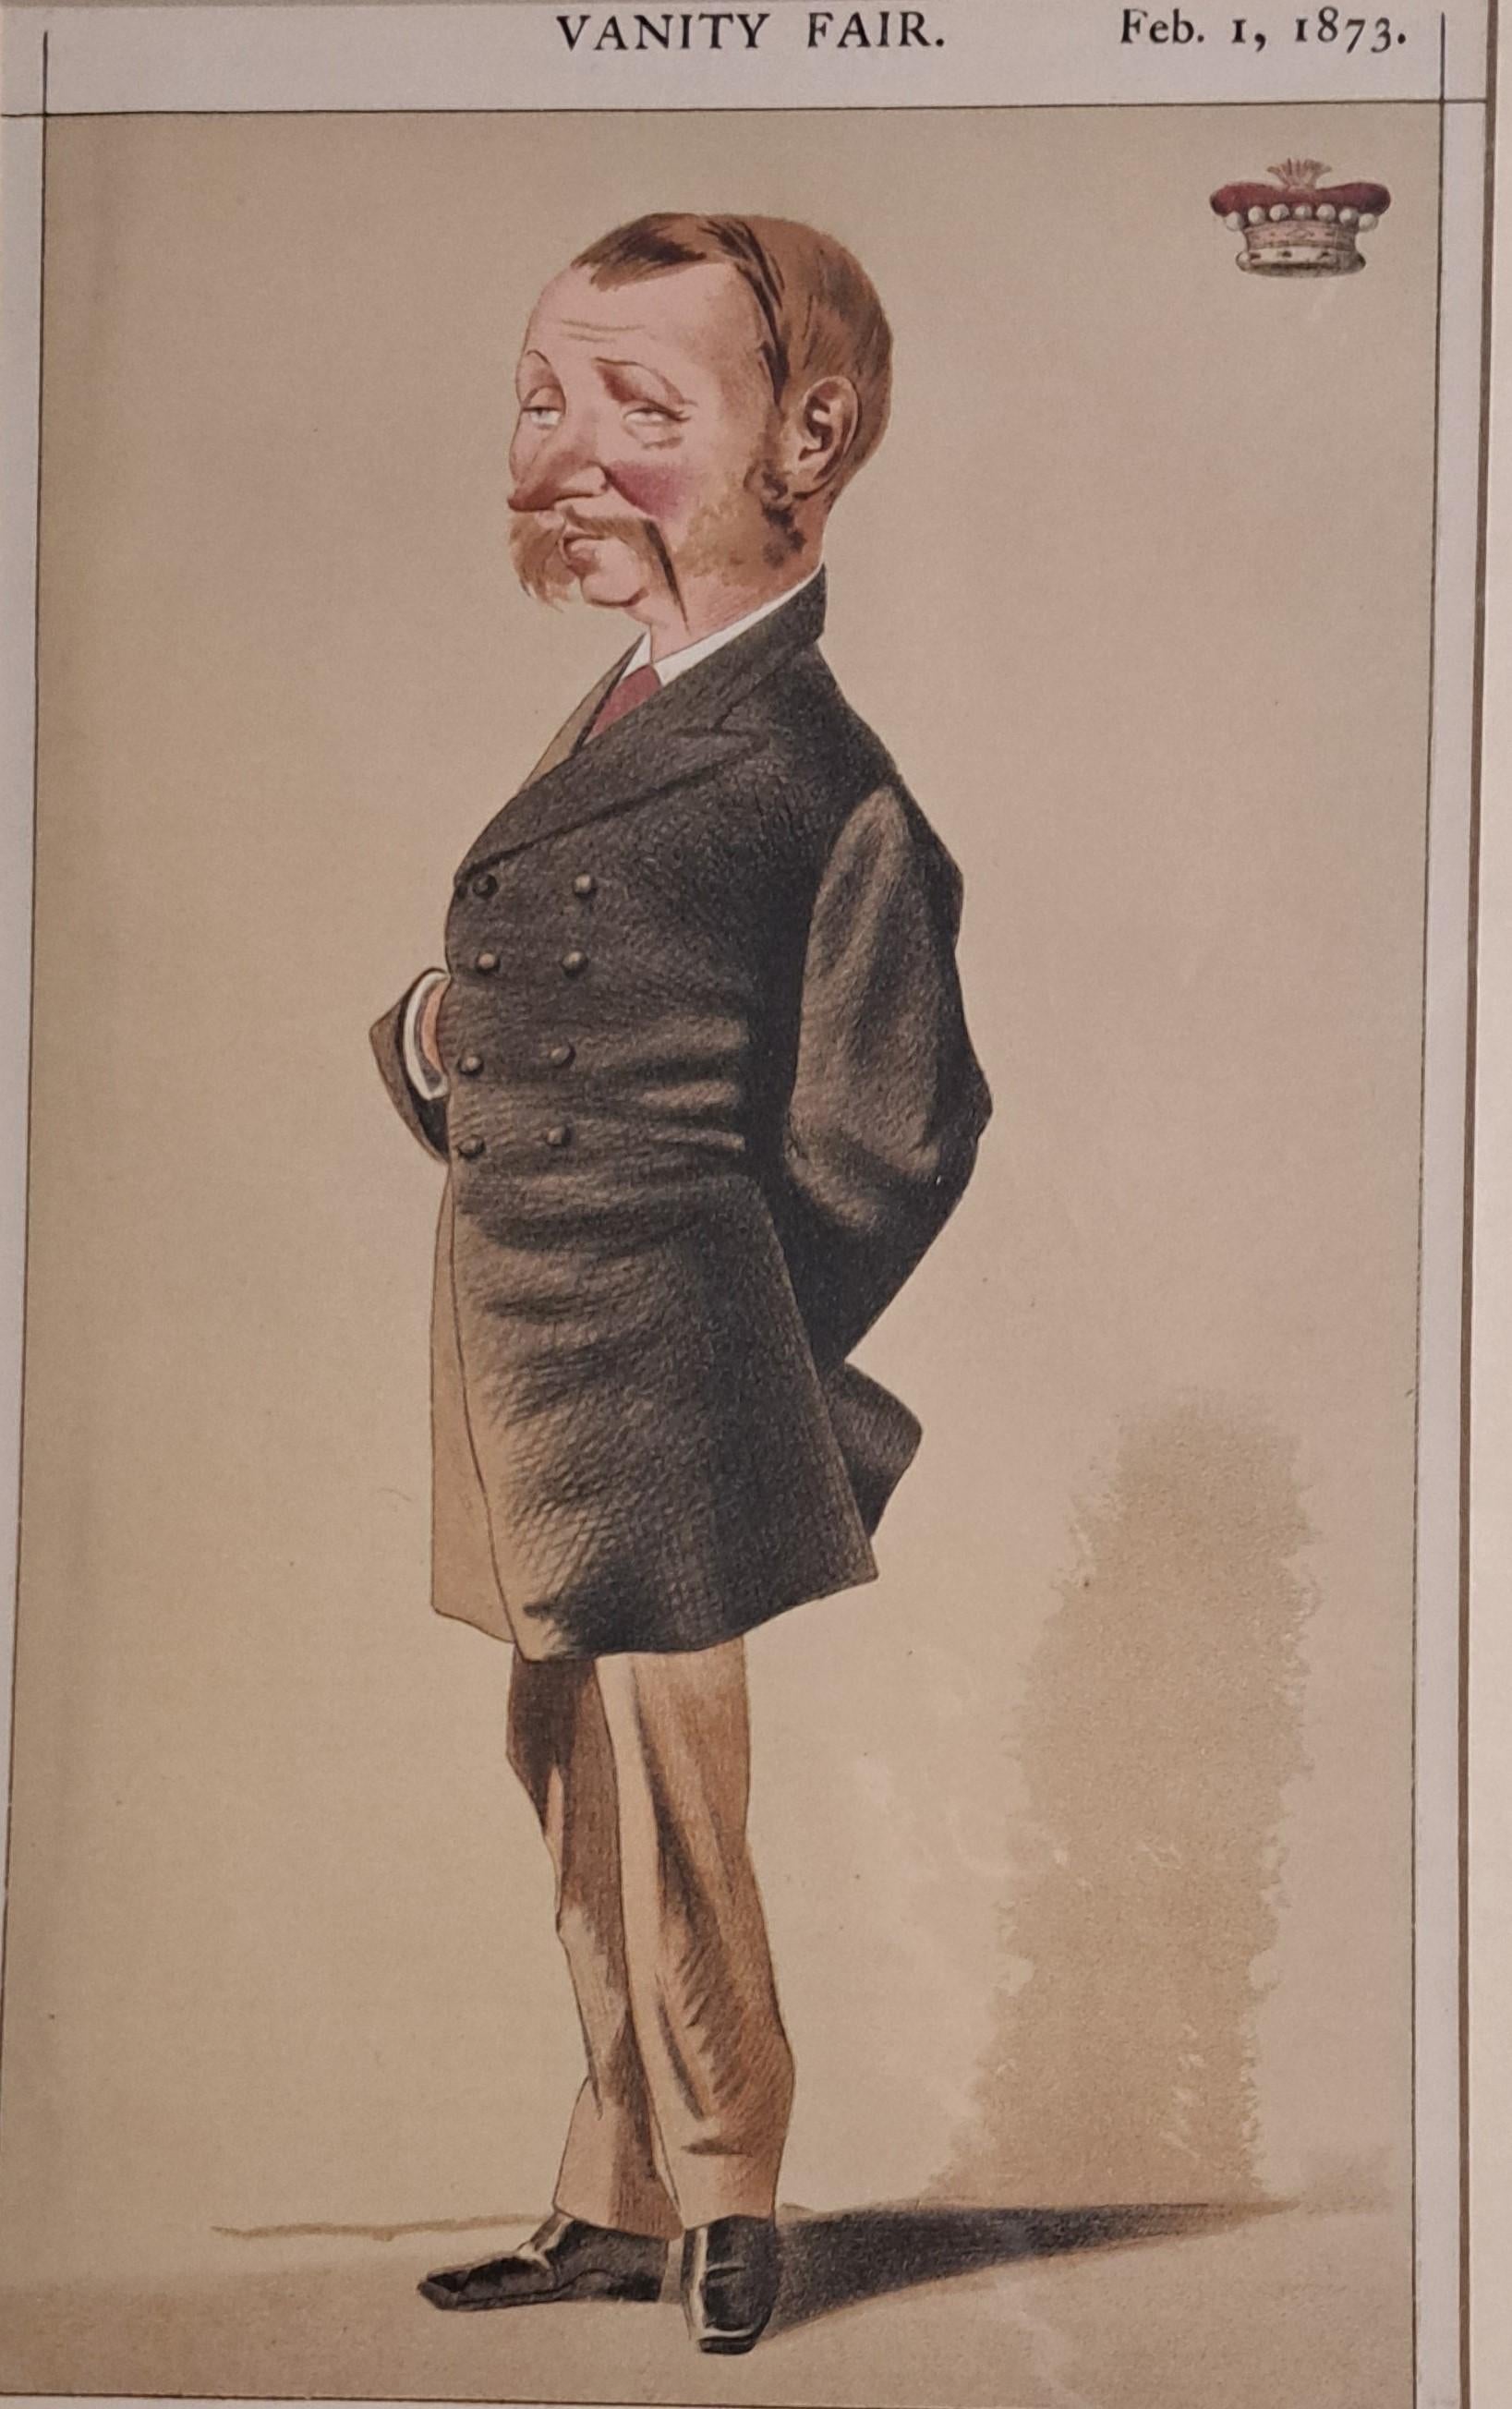 Vanity Fair Print, Statesman no 138 the Earl of Galloway - Brown Portrait Print by Unknown